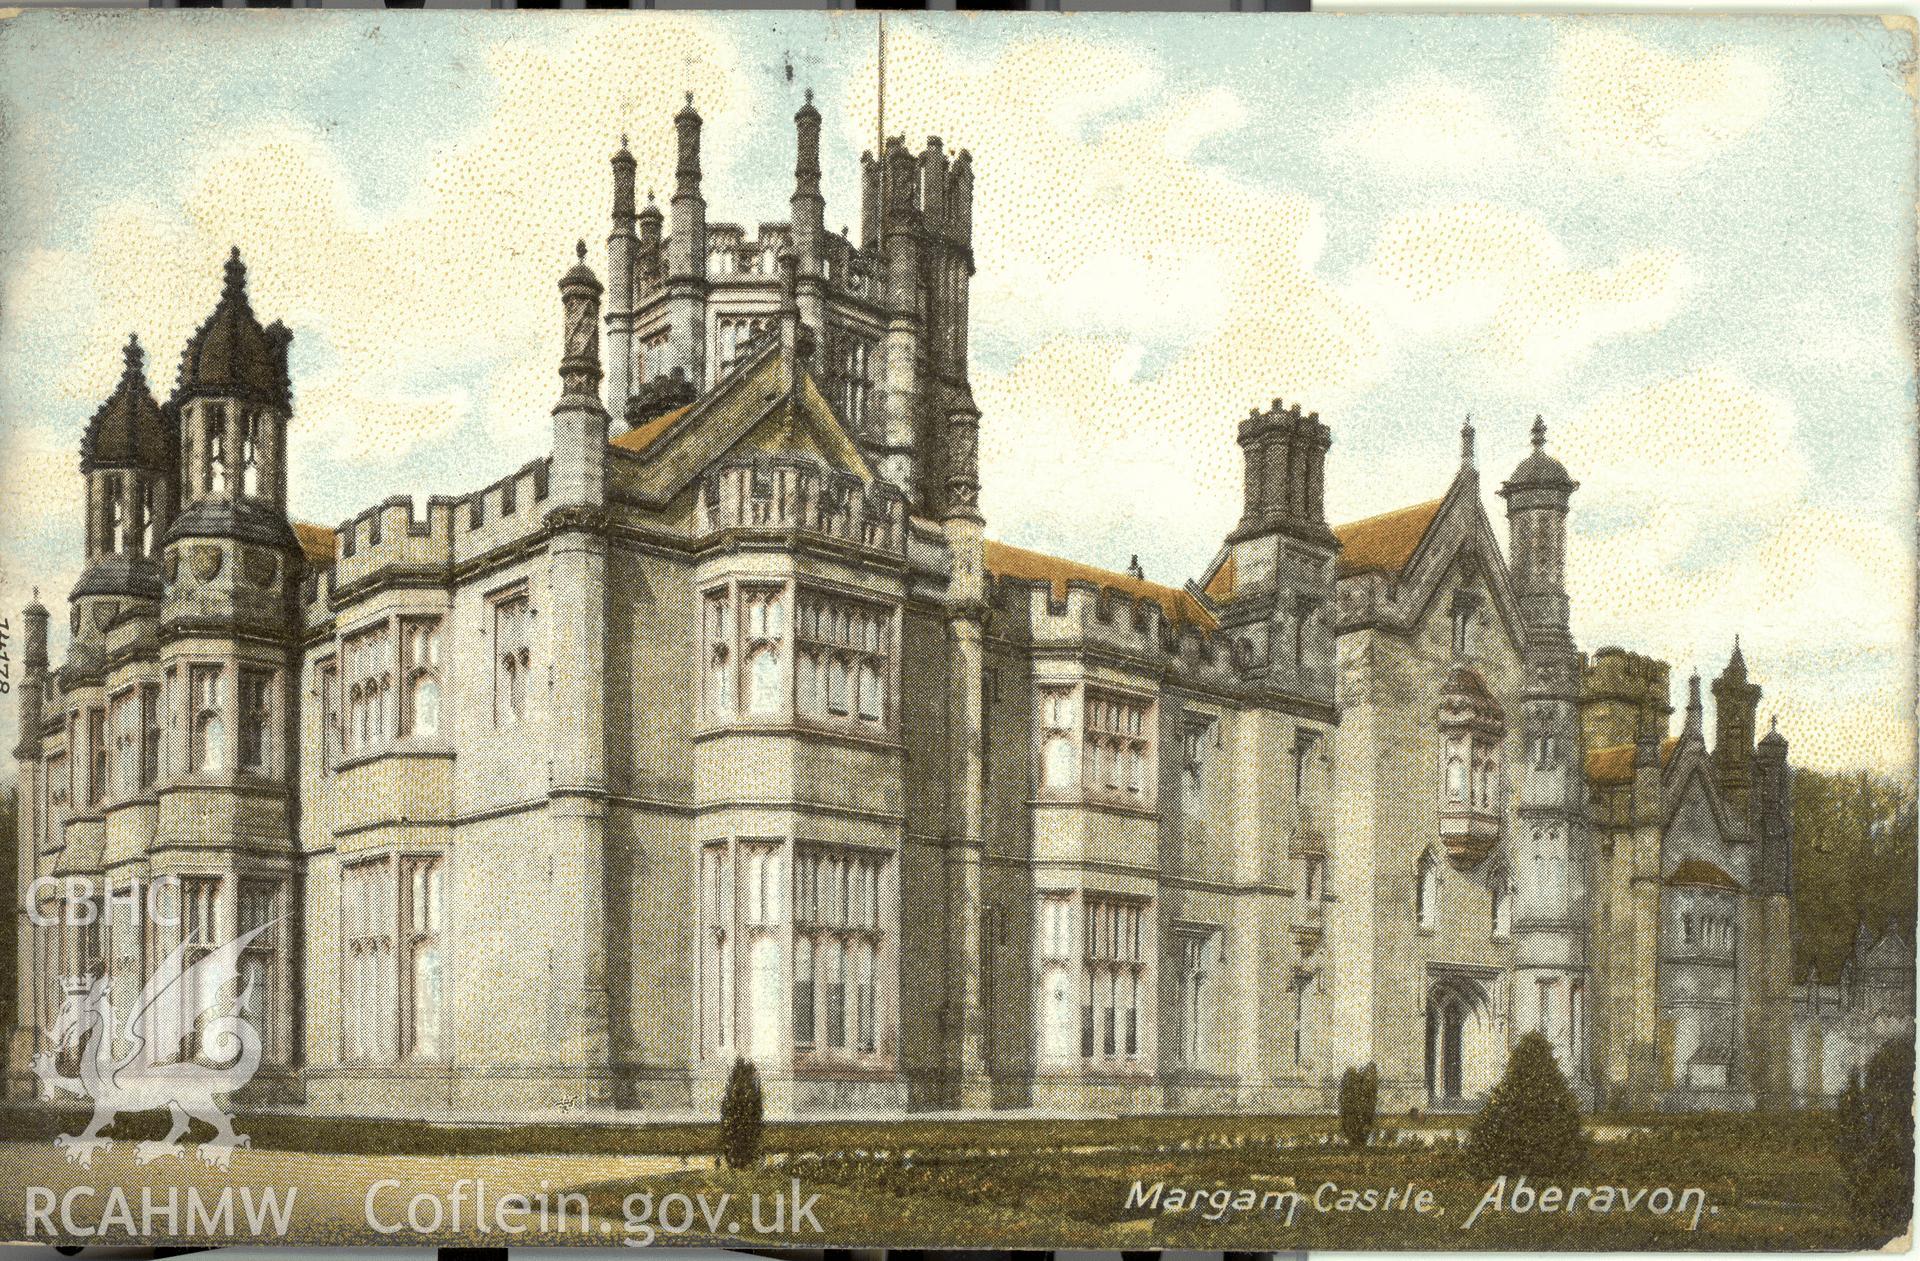 Digitised postcard image of Margam Castle, the Wrench Series. Produced by Parks and Gardens Data Services, from an original item in the Peter Davis Collection at Parks and Gardens UK. We hold only web-resolution images of this collection, suitable for viewing on screen and for research purposes only. We do not hold the original images, or publication quality scans.